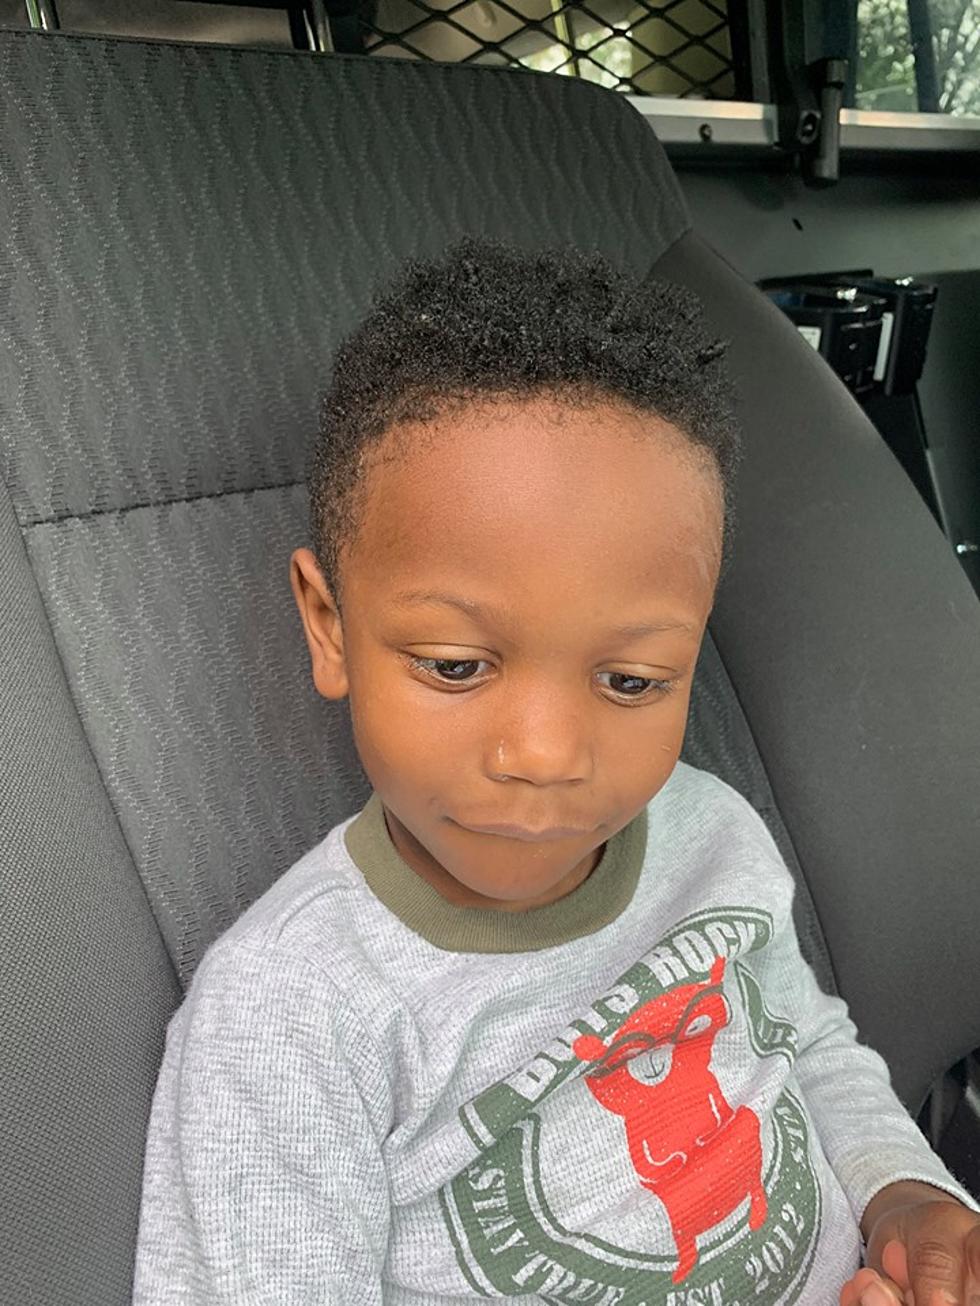 Tuscaloosa Police Searching for Parents of Child Found Friday Morning